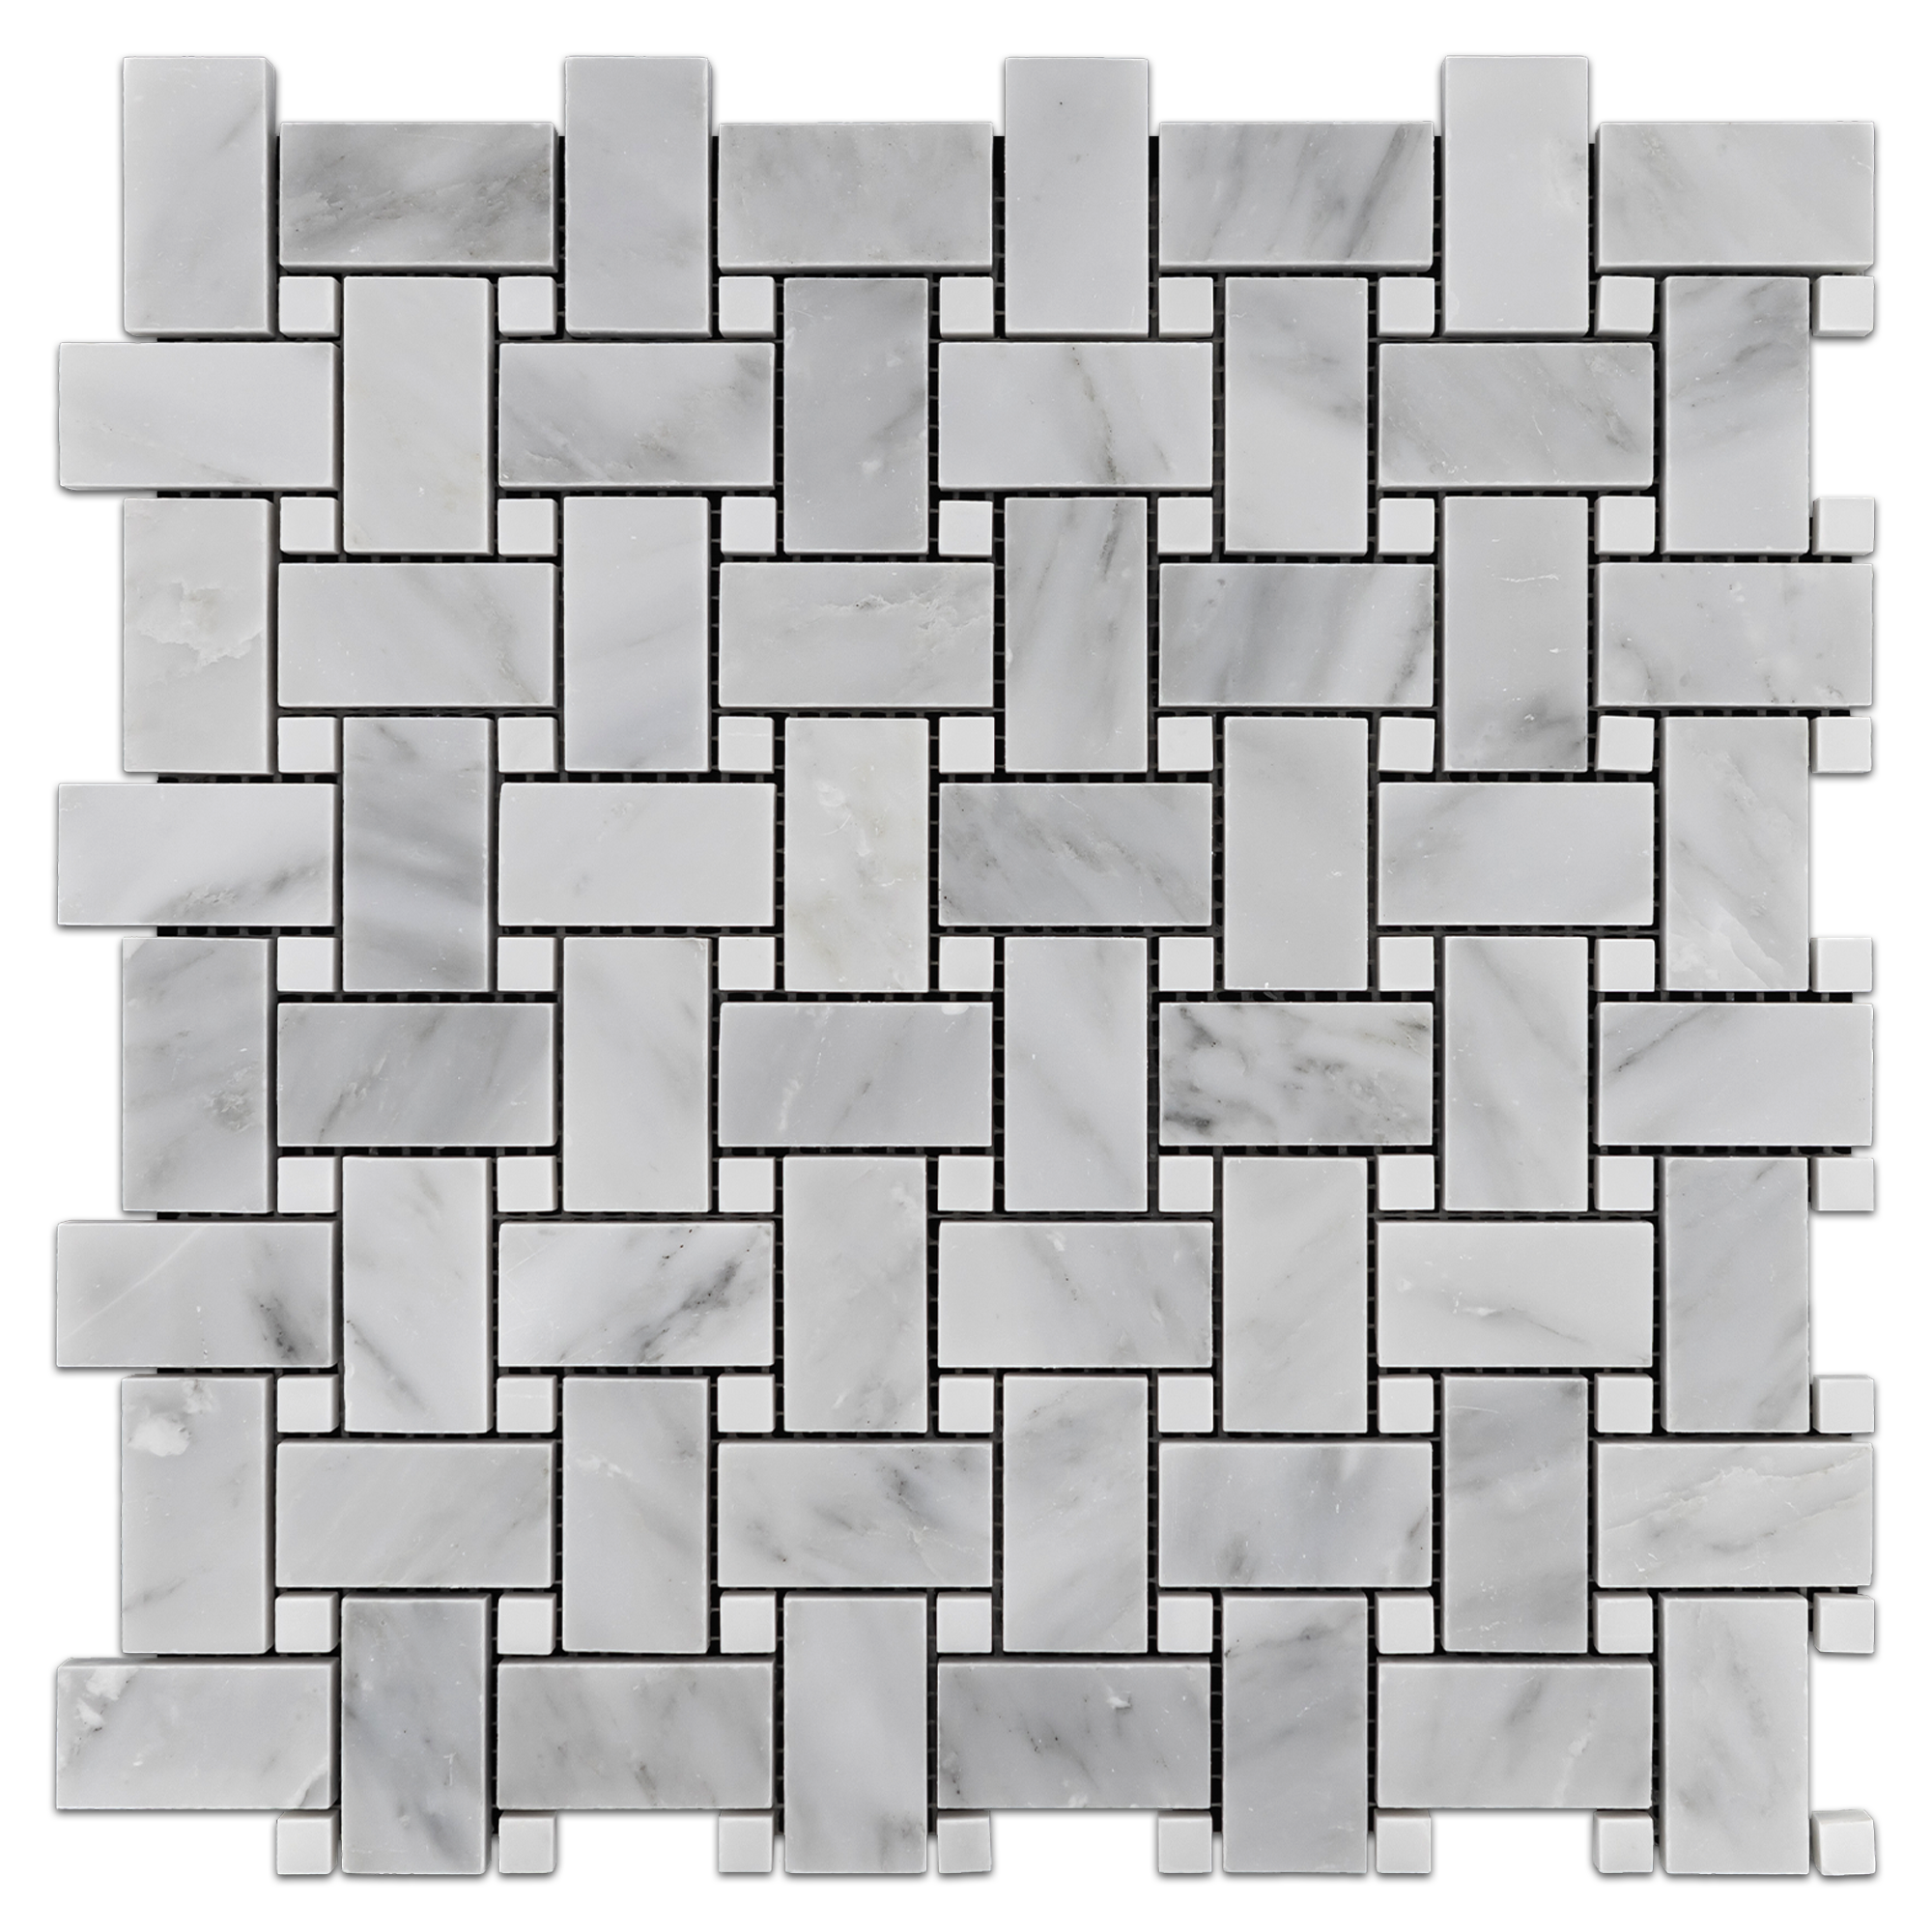 Elon Mystic Gray Pearl White Marble Stone Blend Basketweave Field Mosaic 12x12x0.375 Honed AM9330H Surface Group International Product